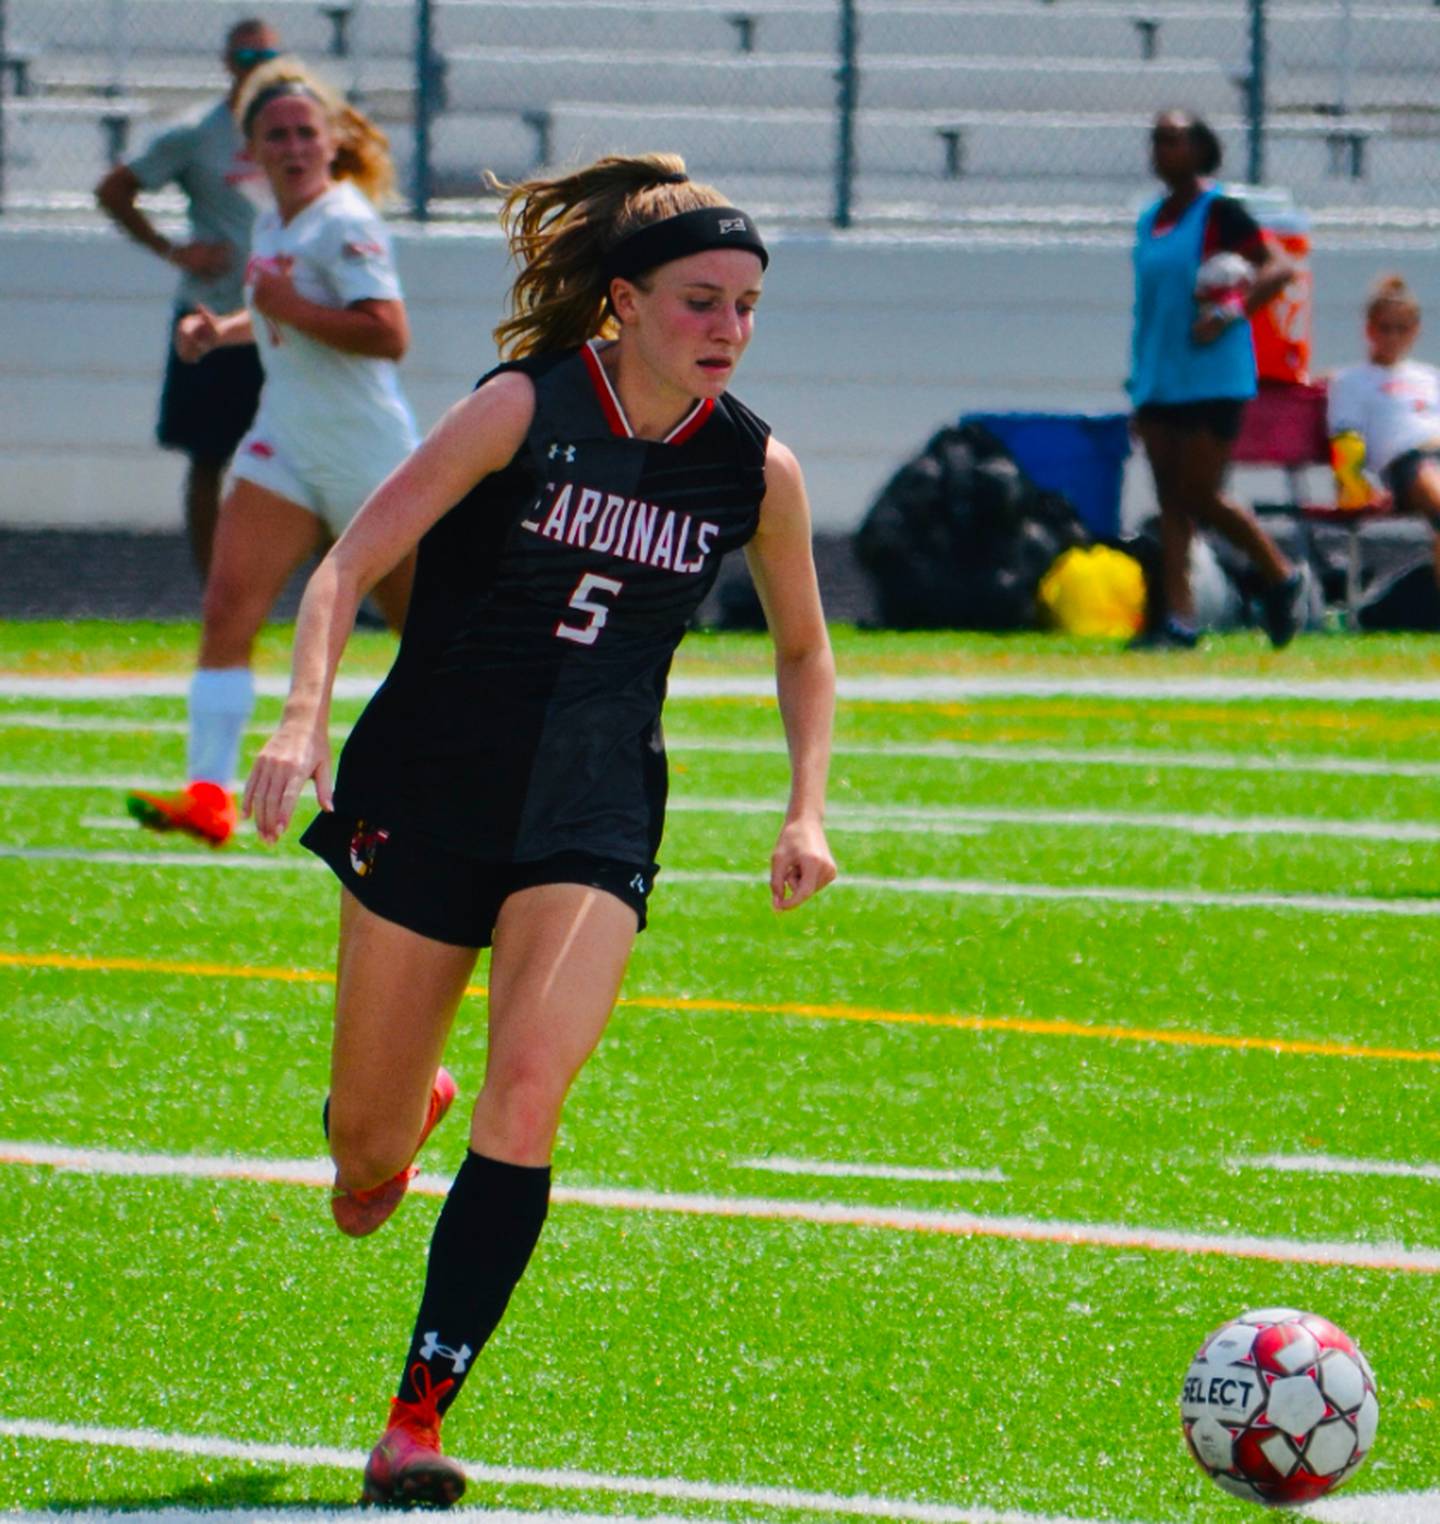 Crofton's Cassidy Nichols, shown here in a preseason scrimmage against Mercy, has the Anne Arundel County school on the cusp of a first state title. The Cardinals defeated Huntingtown in a Class 3A state semifinal Saturday, and will face reigning state champ Mount Hebron for the crown Thursday evening at Loyola University's Ridley Athletic Complex in Baltimore.